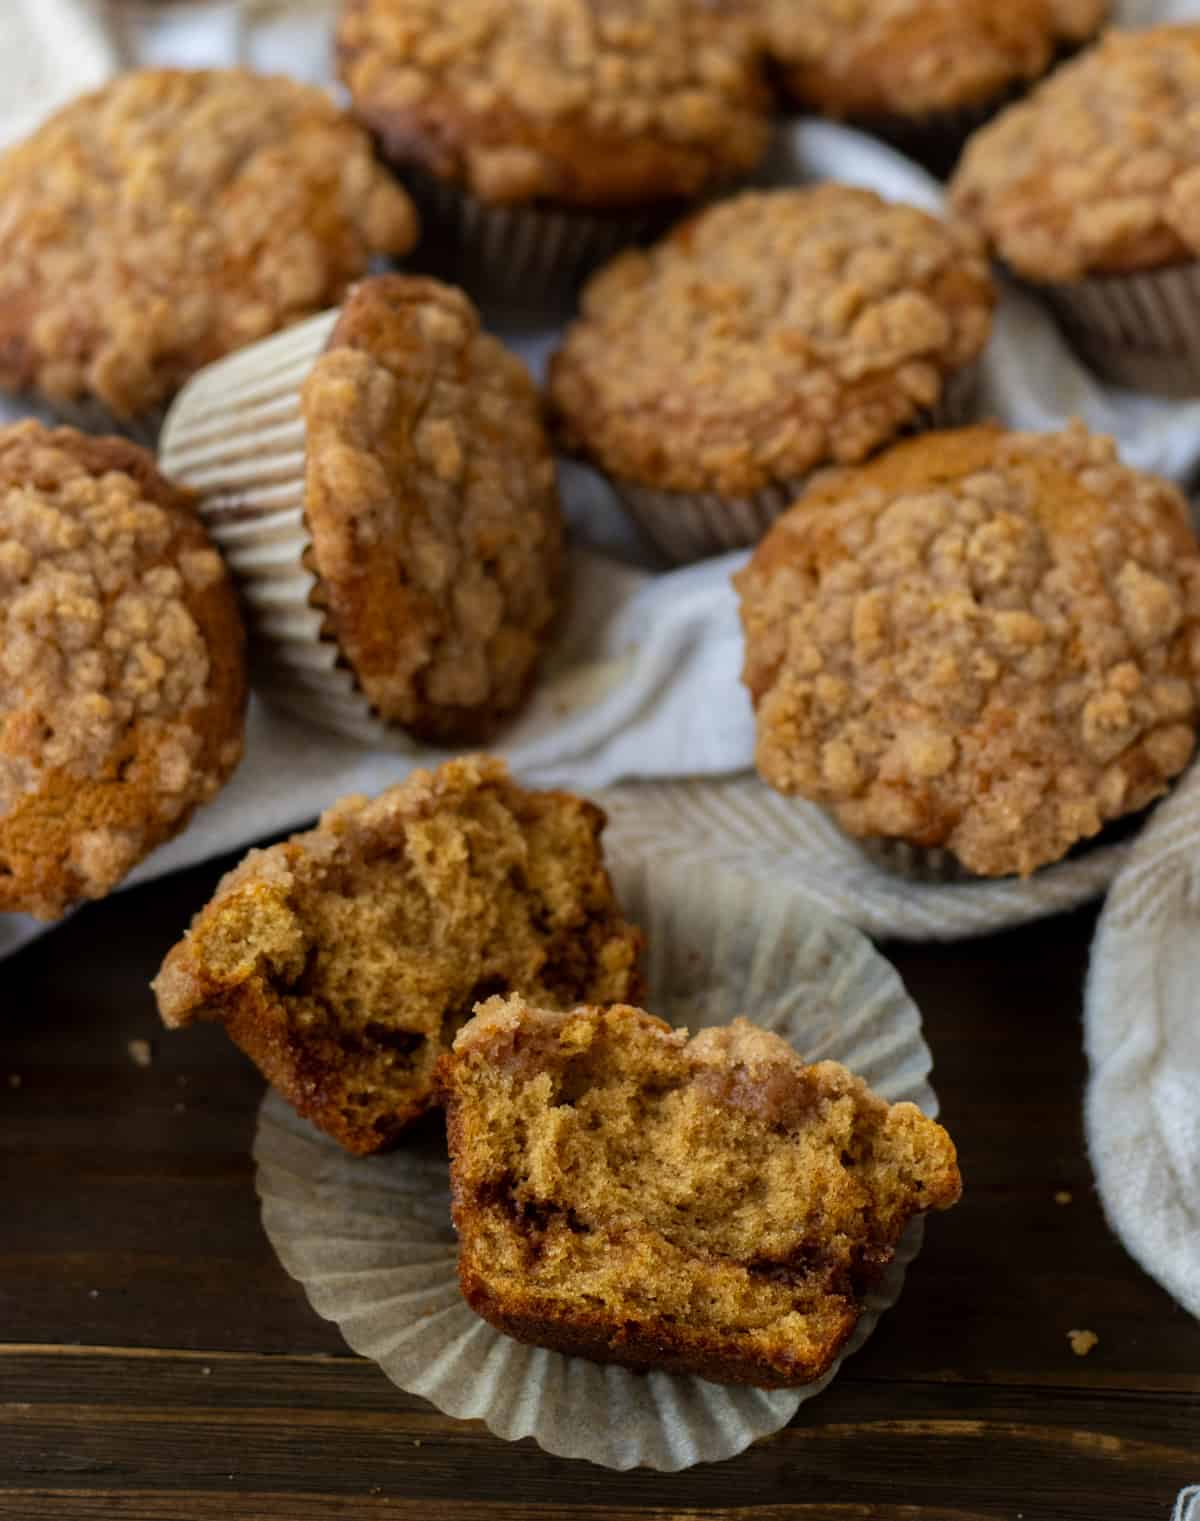 Cinnamon streusel muffins on a towel with one cut open.